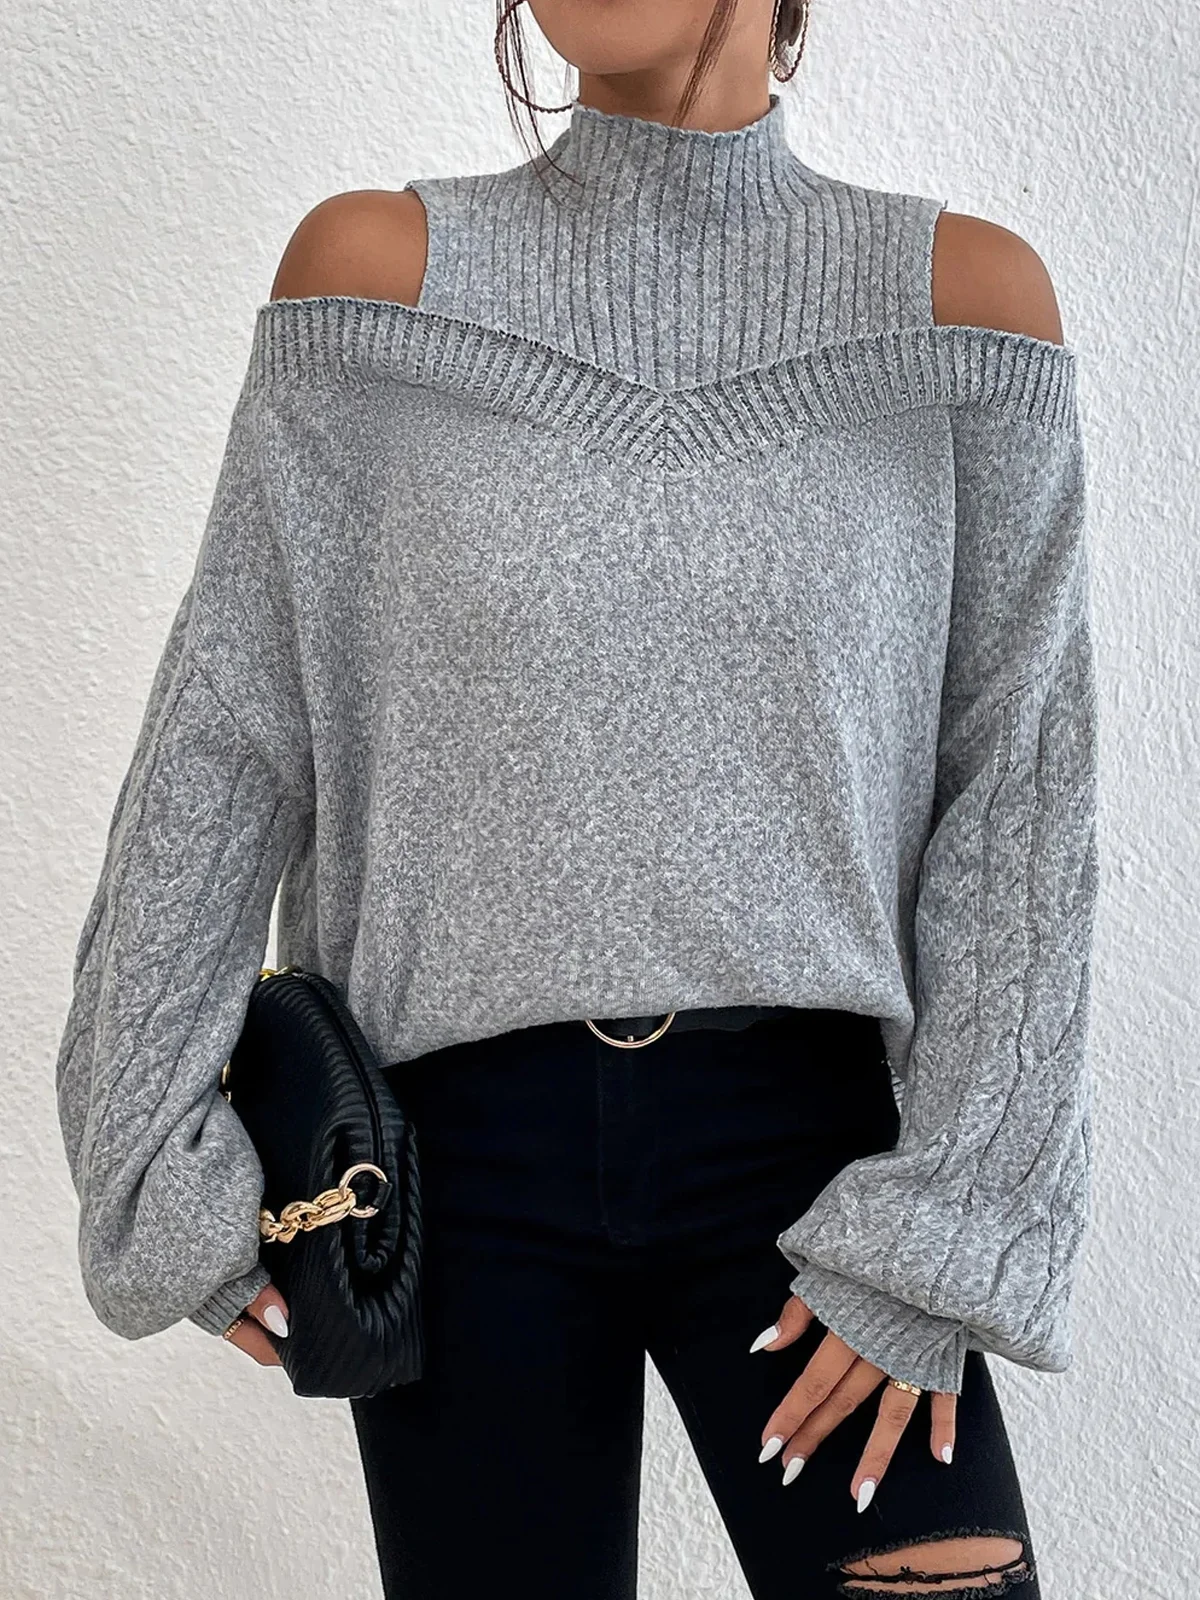 Casual Loose Tunic Sweater Knit Jumper